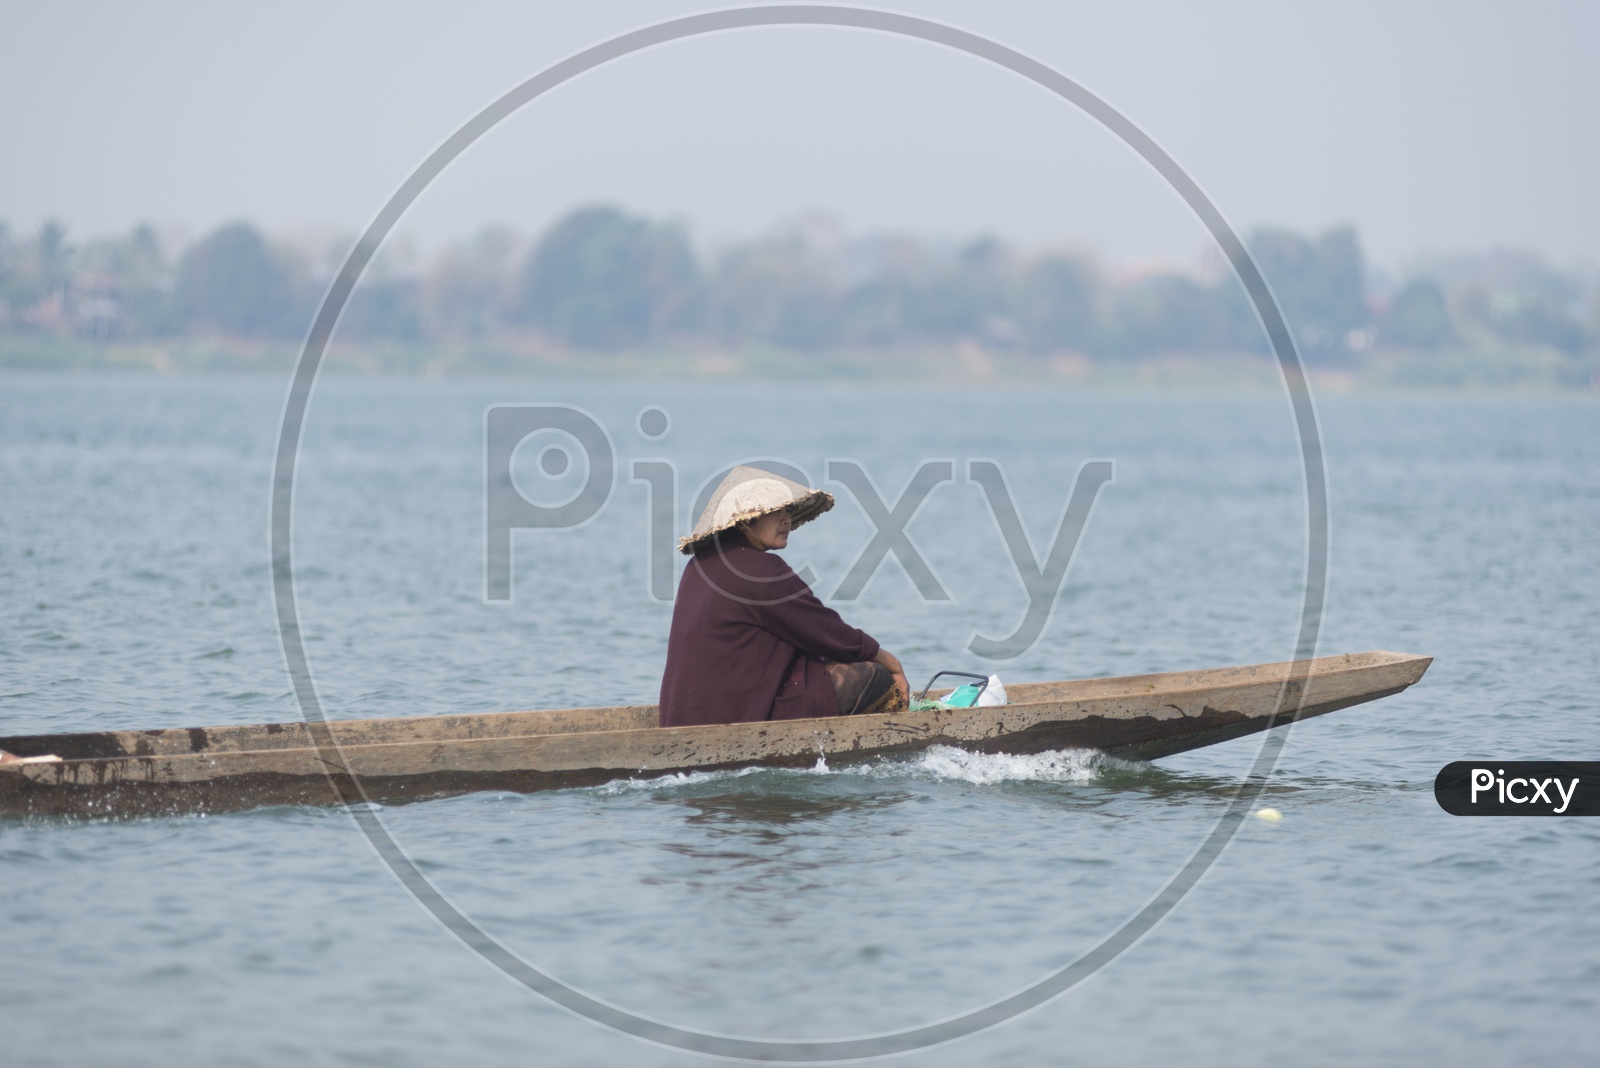 Unidentified Woman in a boat for crossing the border of Thailand and Laos at Ubon Ratchathani province in Thailand